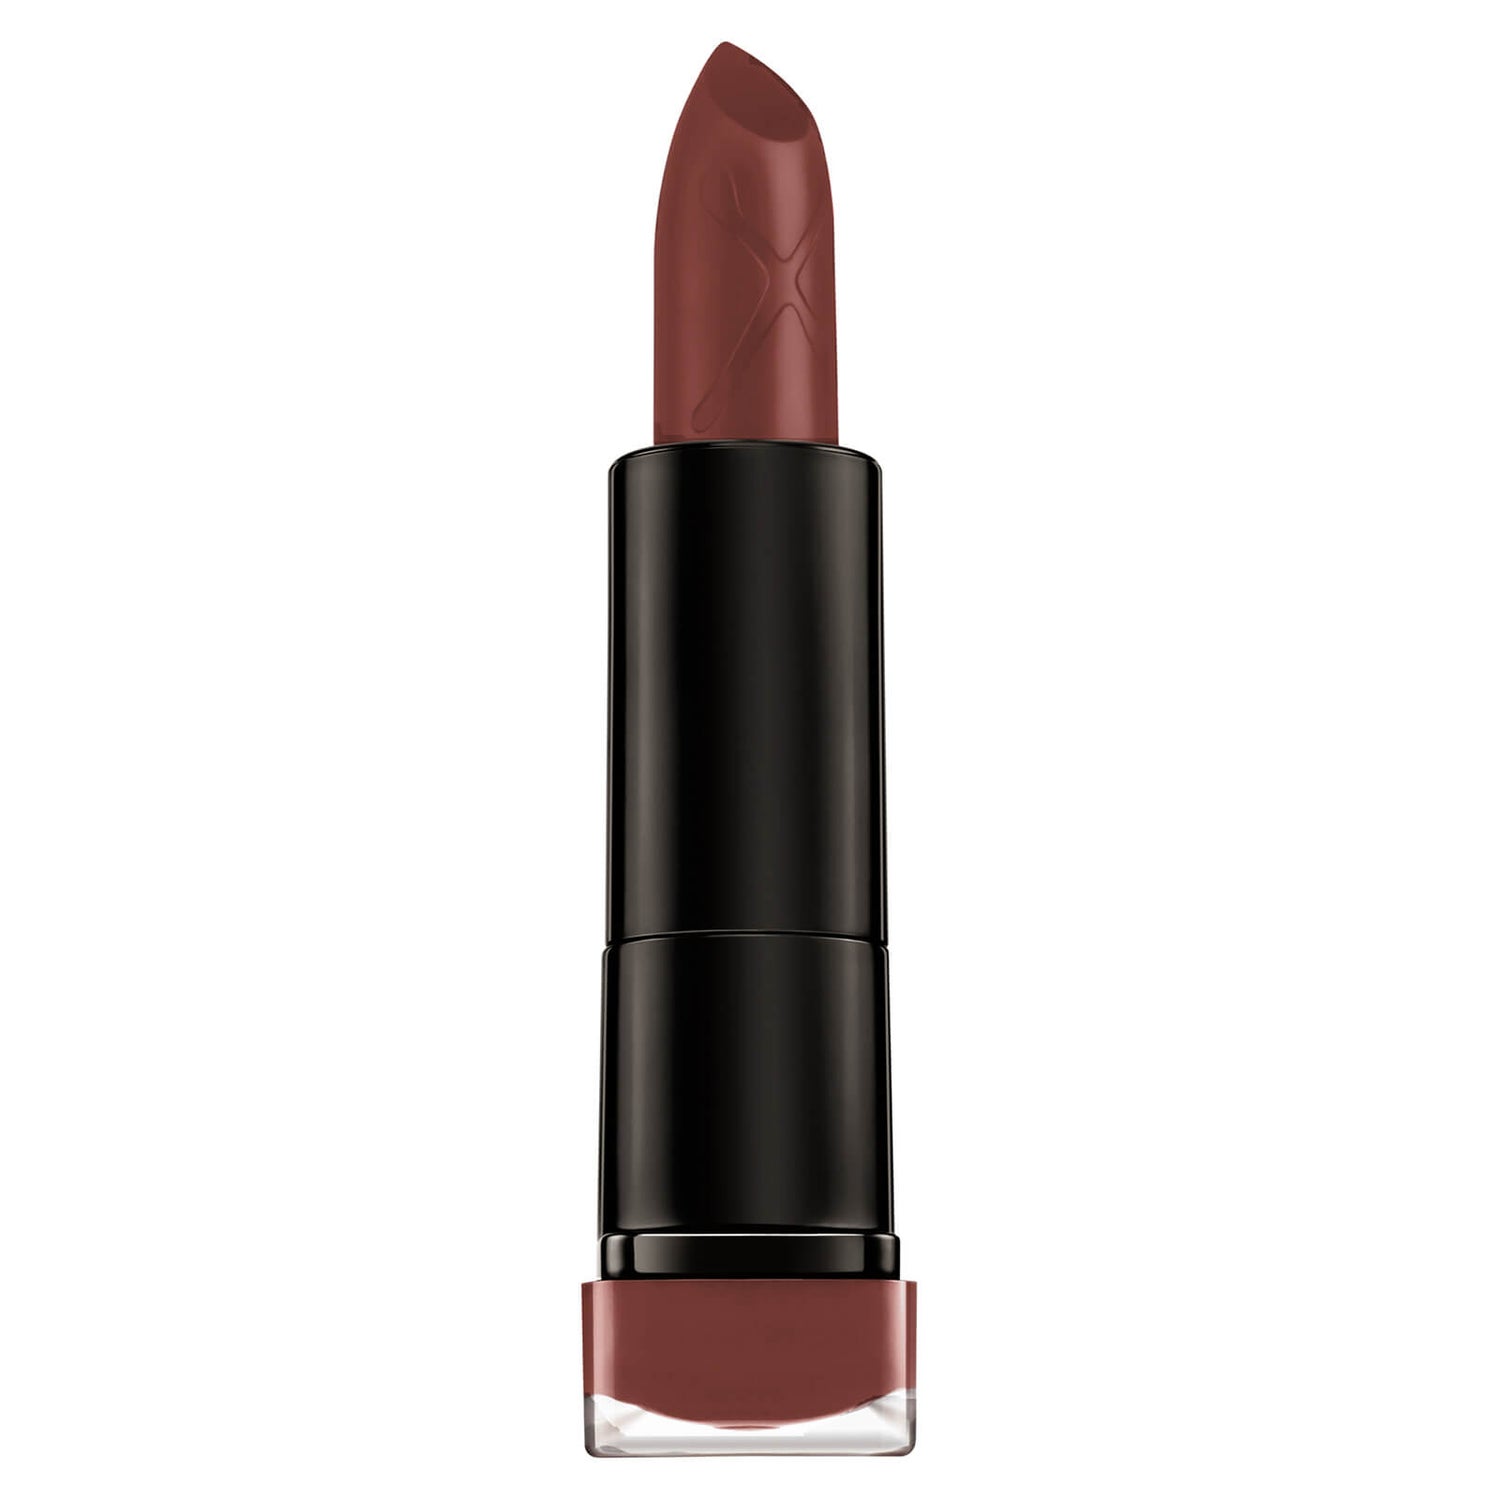 Max Factor Colour Elixir Velvet Matte Lipstick with Oils and Butters 3.5g (Various Shades)